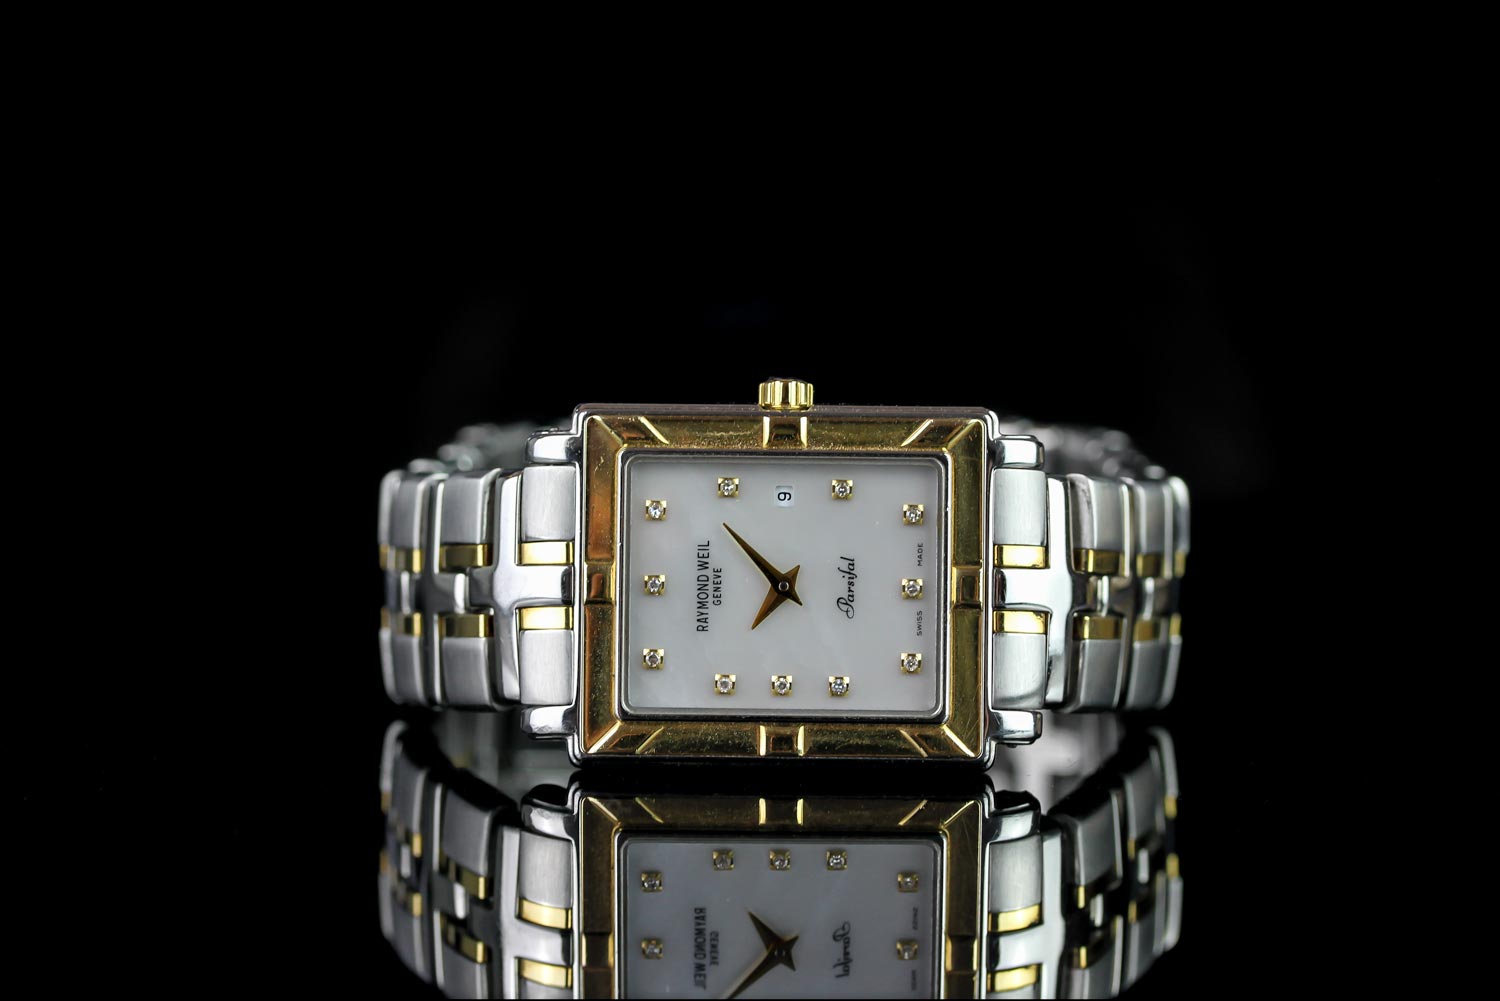 GENTLEMEN'S RAYMOND WEIL PARSIFAL WRISTWATCH REF 9330, rectangular mother of pearl dial with diamond